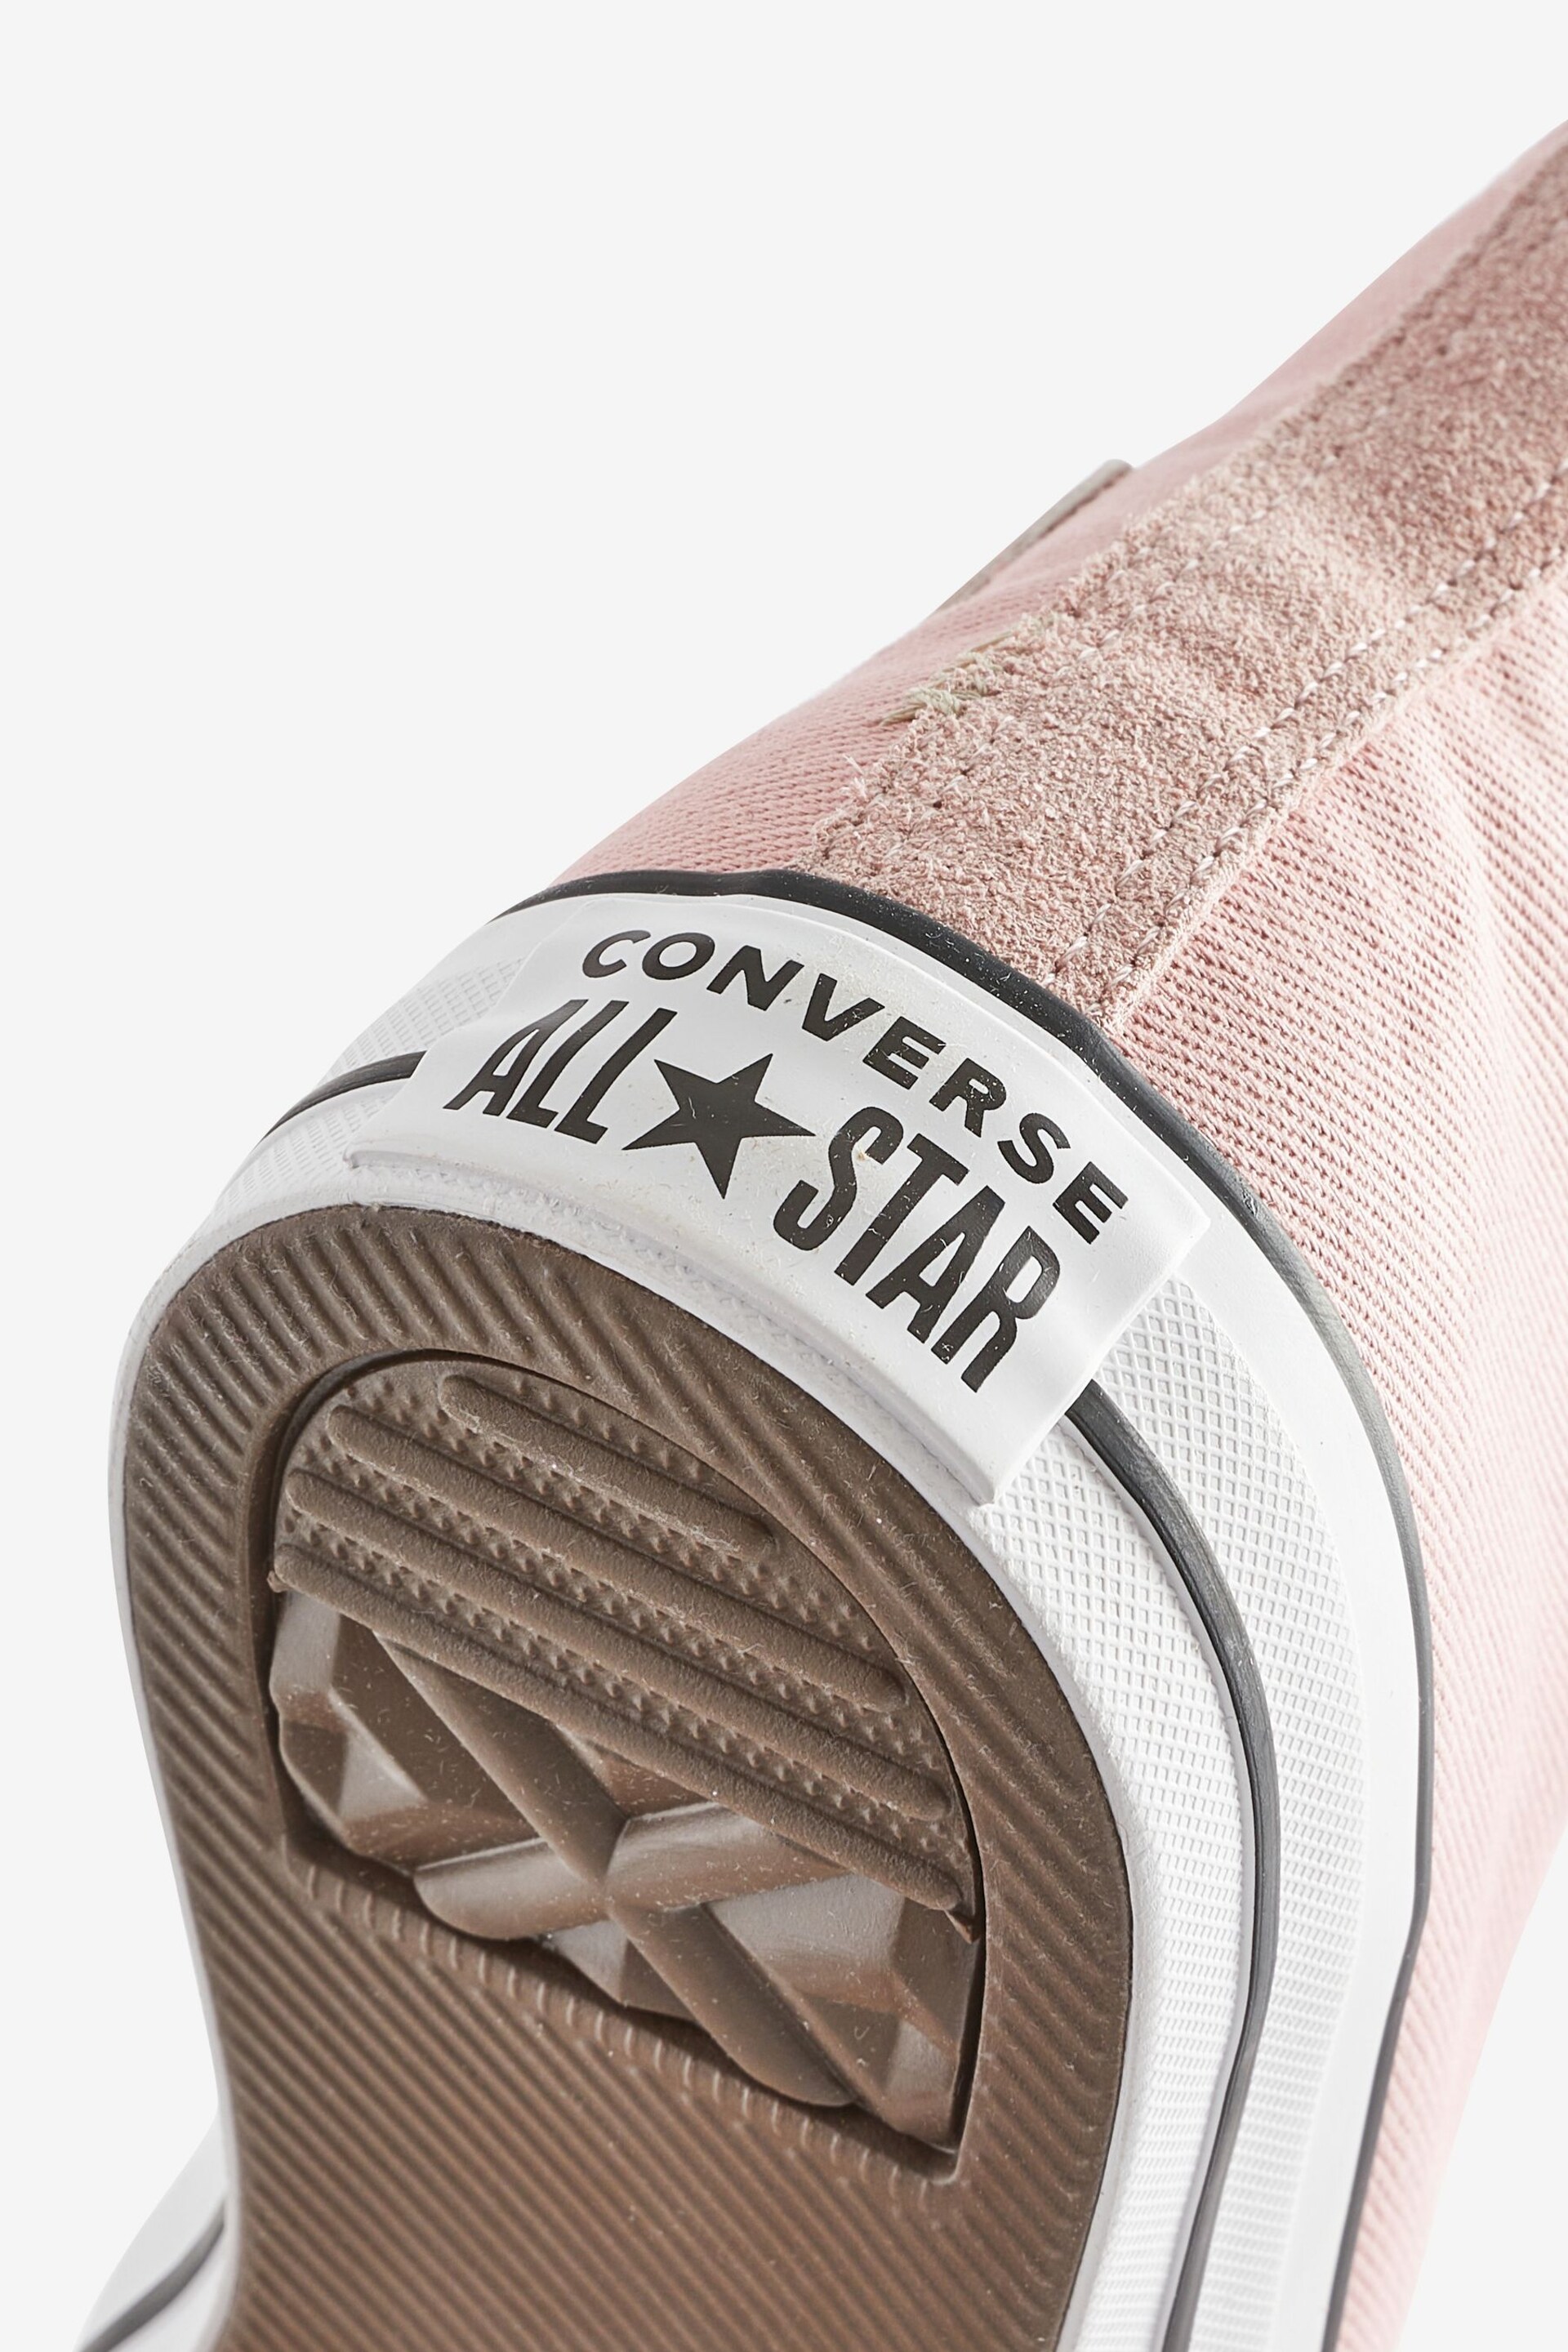 Converse Pink/White Chuck Taylor All Star High Top Trainers - Image 8 of 9